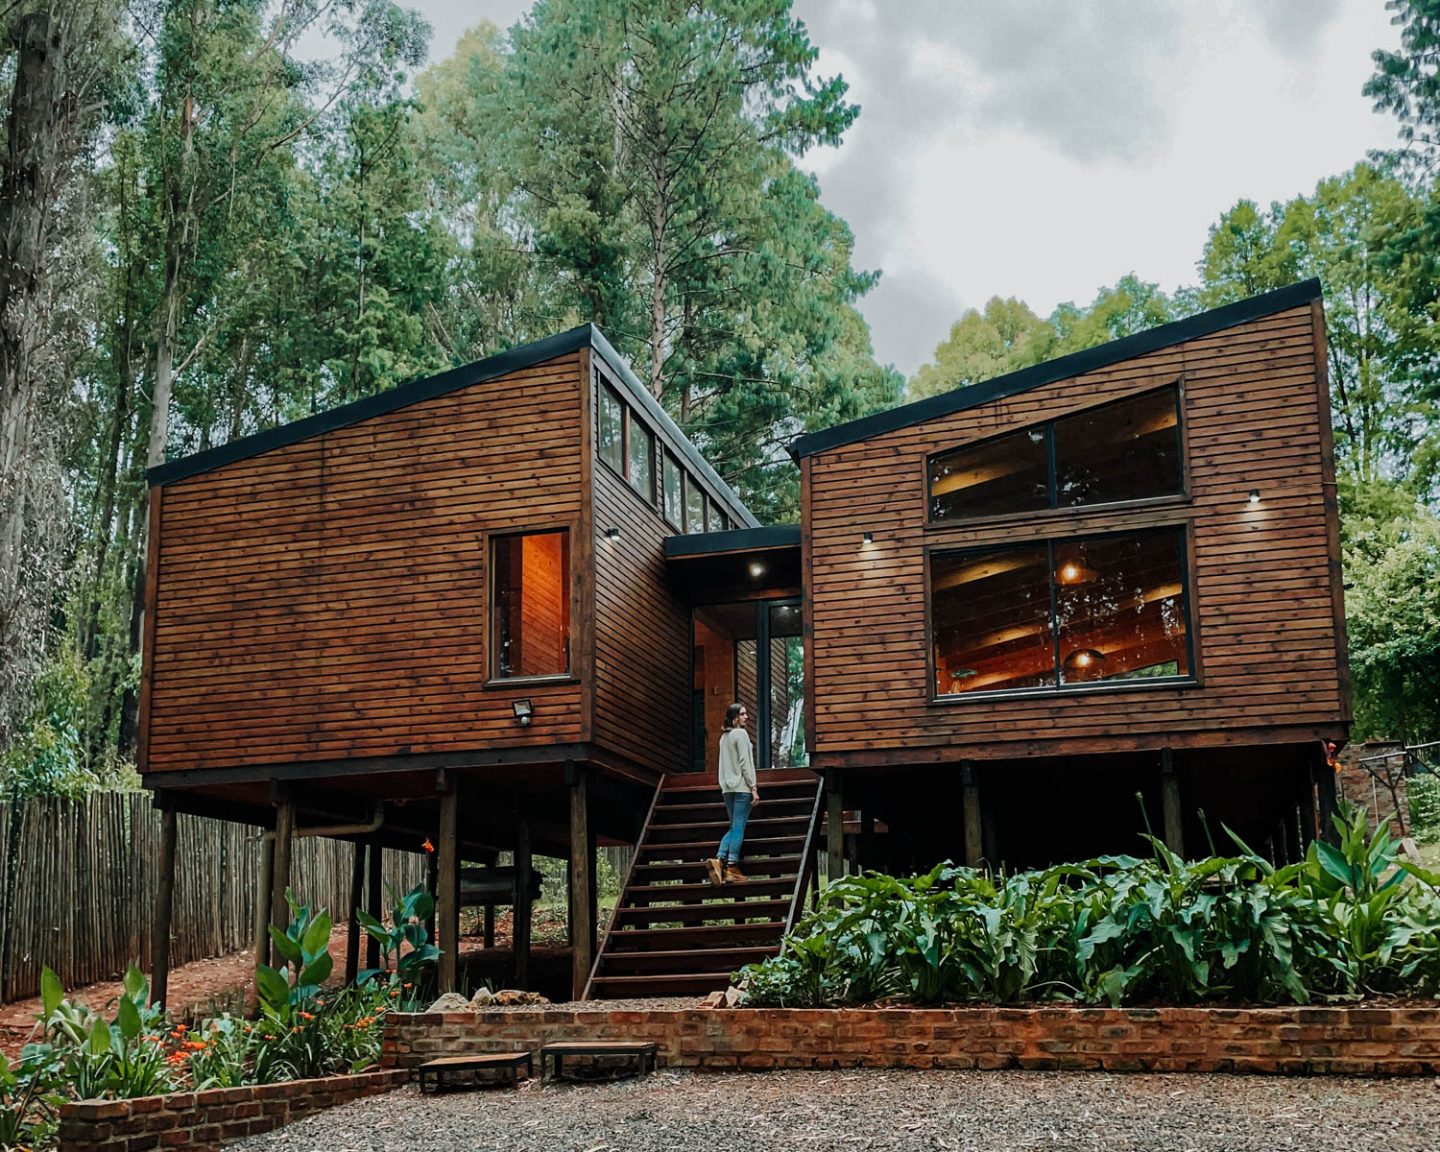 dullstroom forest cabin exterior view